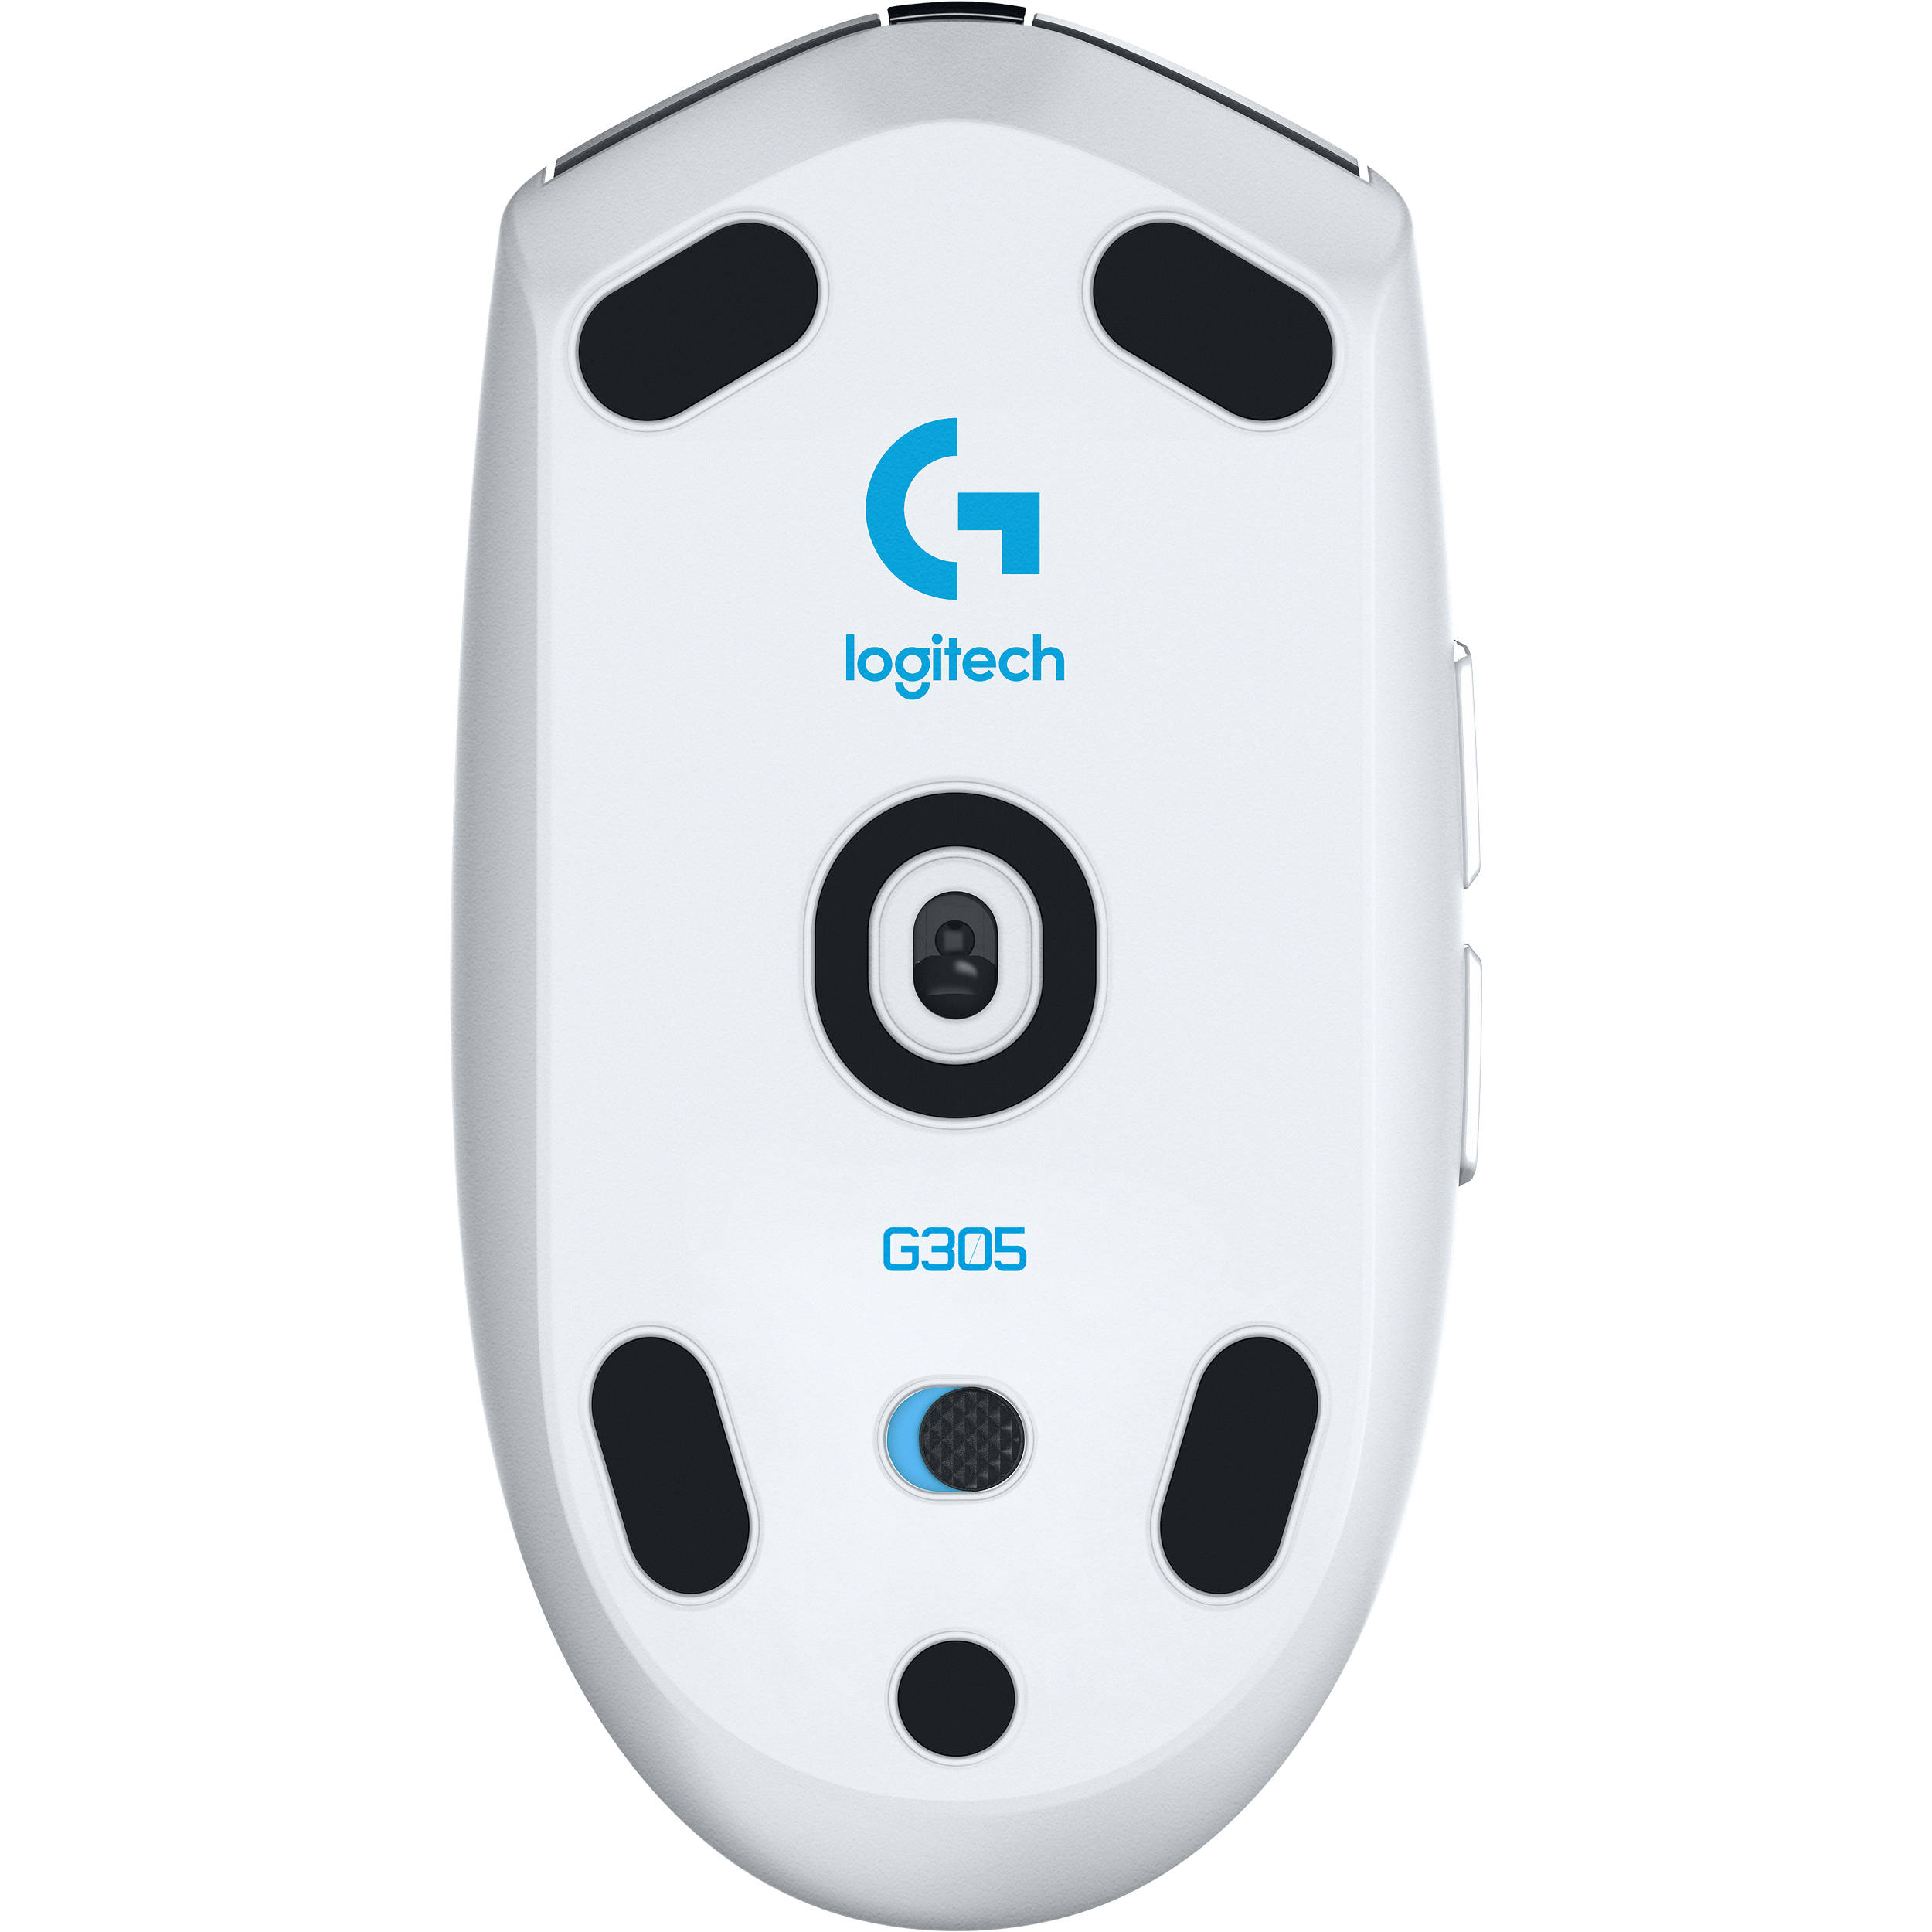 Logitech G305 Software Download / I Used To Use The Logitech M720 Triathlon Mouse And I Just ...